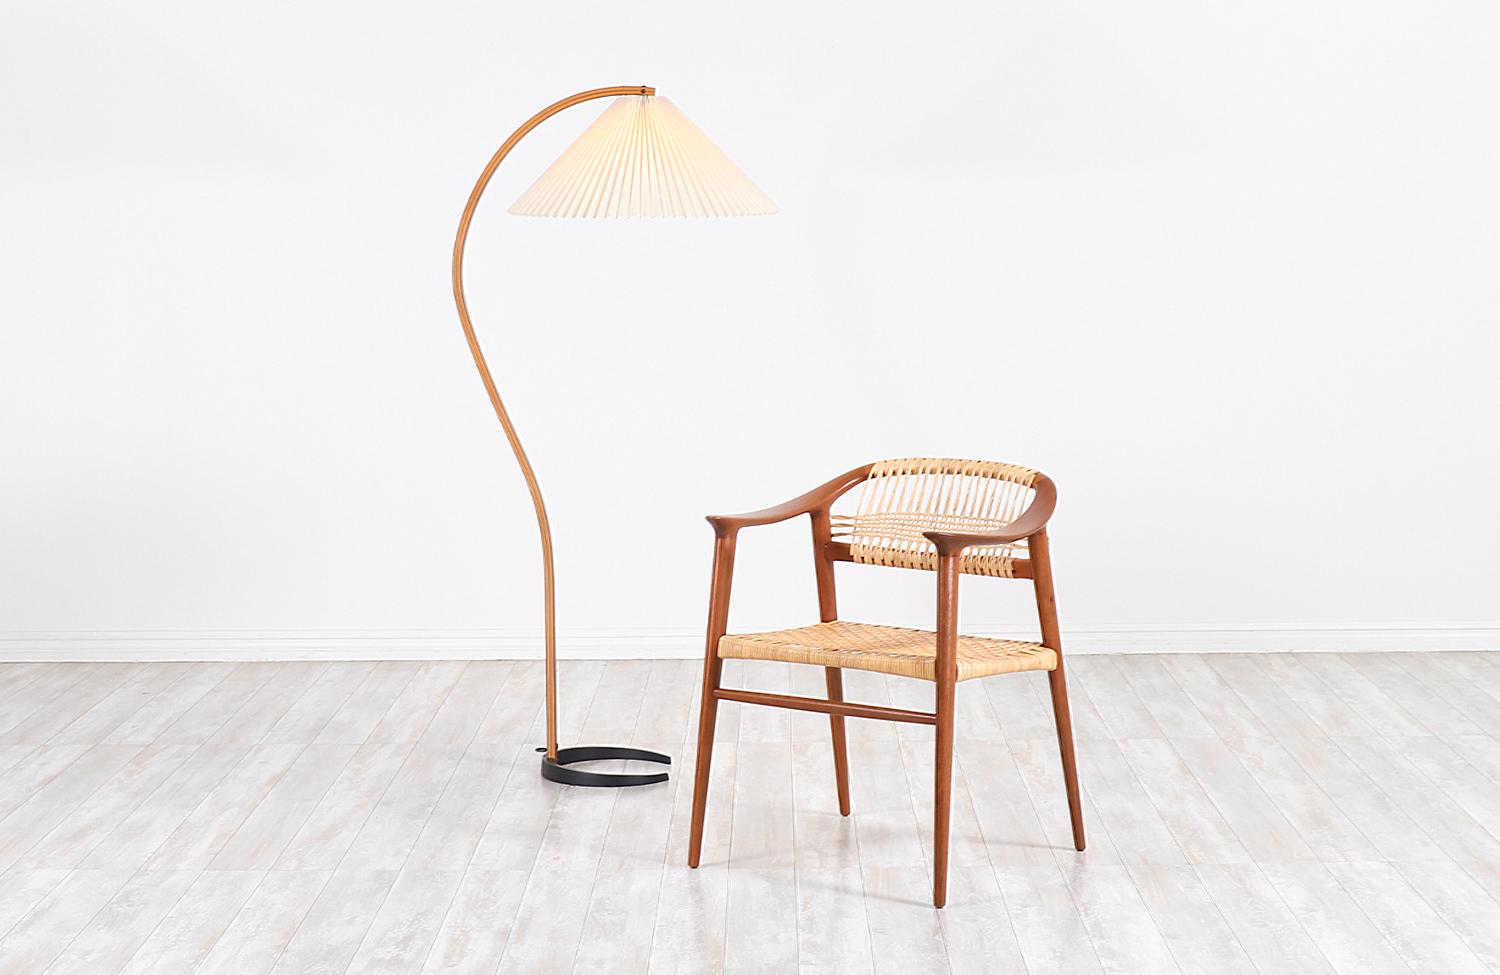 Sculptural teak floor lamp designed and manufactured by Mads Caprani in Denmark circa 1970s. This iconic Danish Modern design features a solid crescent-shaped iron base that supports the bentwood teak arm and the original pleated shade in pristine